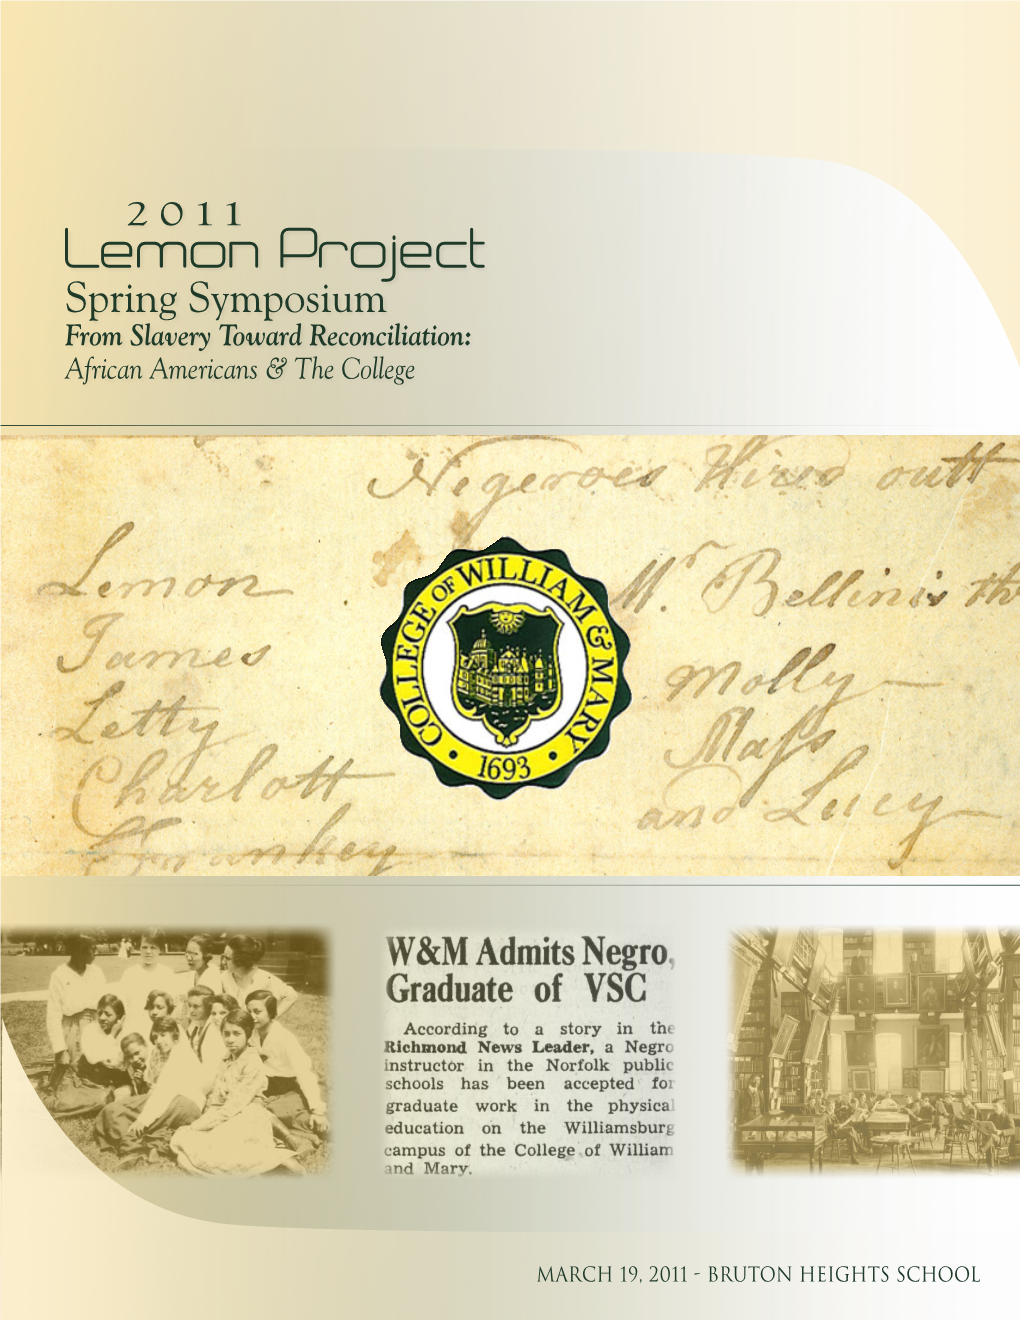 Lemon Project Spring Symposium from Slavery Toward Reconciliation: African Americans & the College